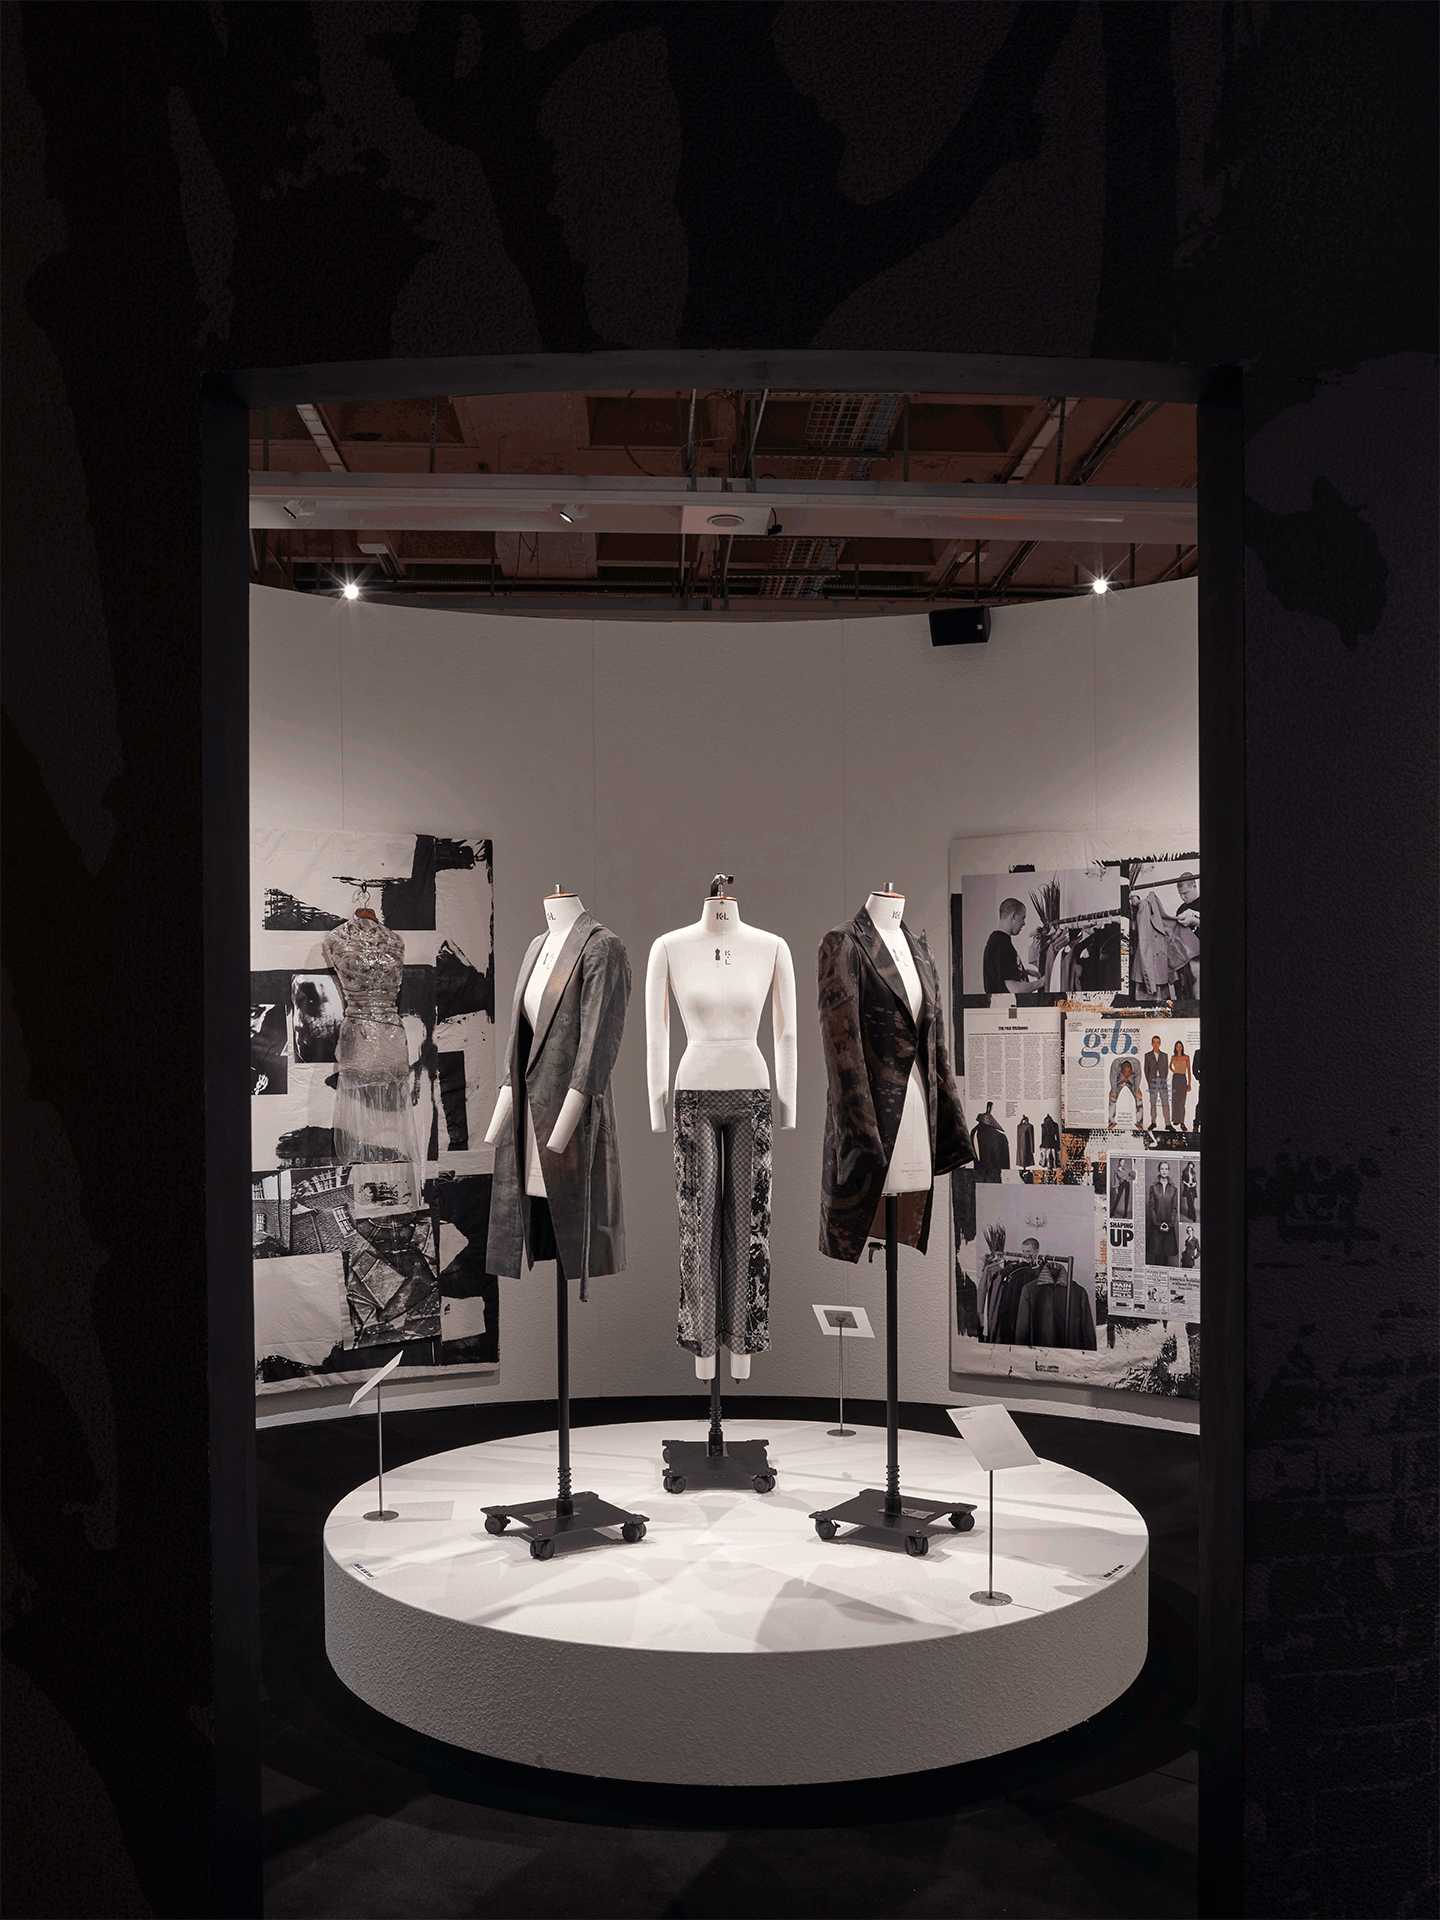 The ‘Alexander McQueen: The Story of Taxi Driver room’ of ‘Rebel: 30 Years of London Fashion’, the exhibition sponsored by Alexander McQueen. Photograph by Andy Stagg. Image Courtesy of The Design Museum